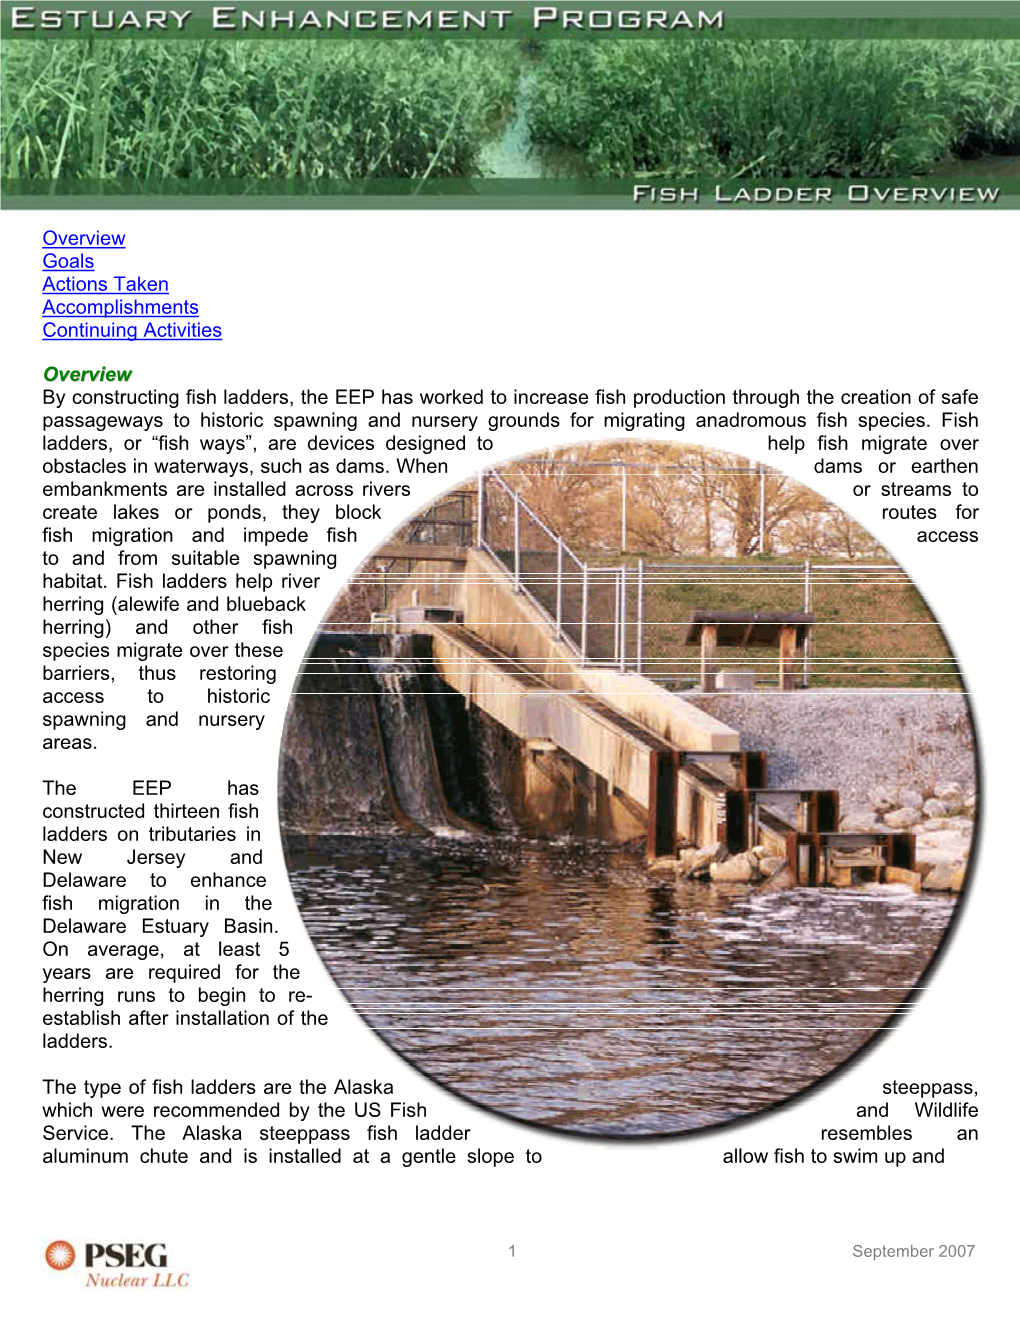 Fish Ladder Overview